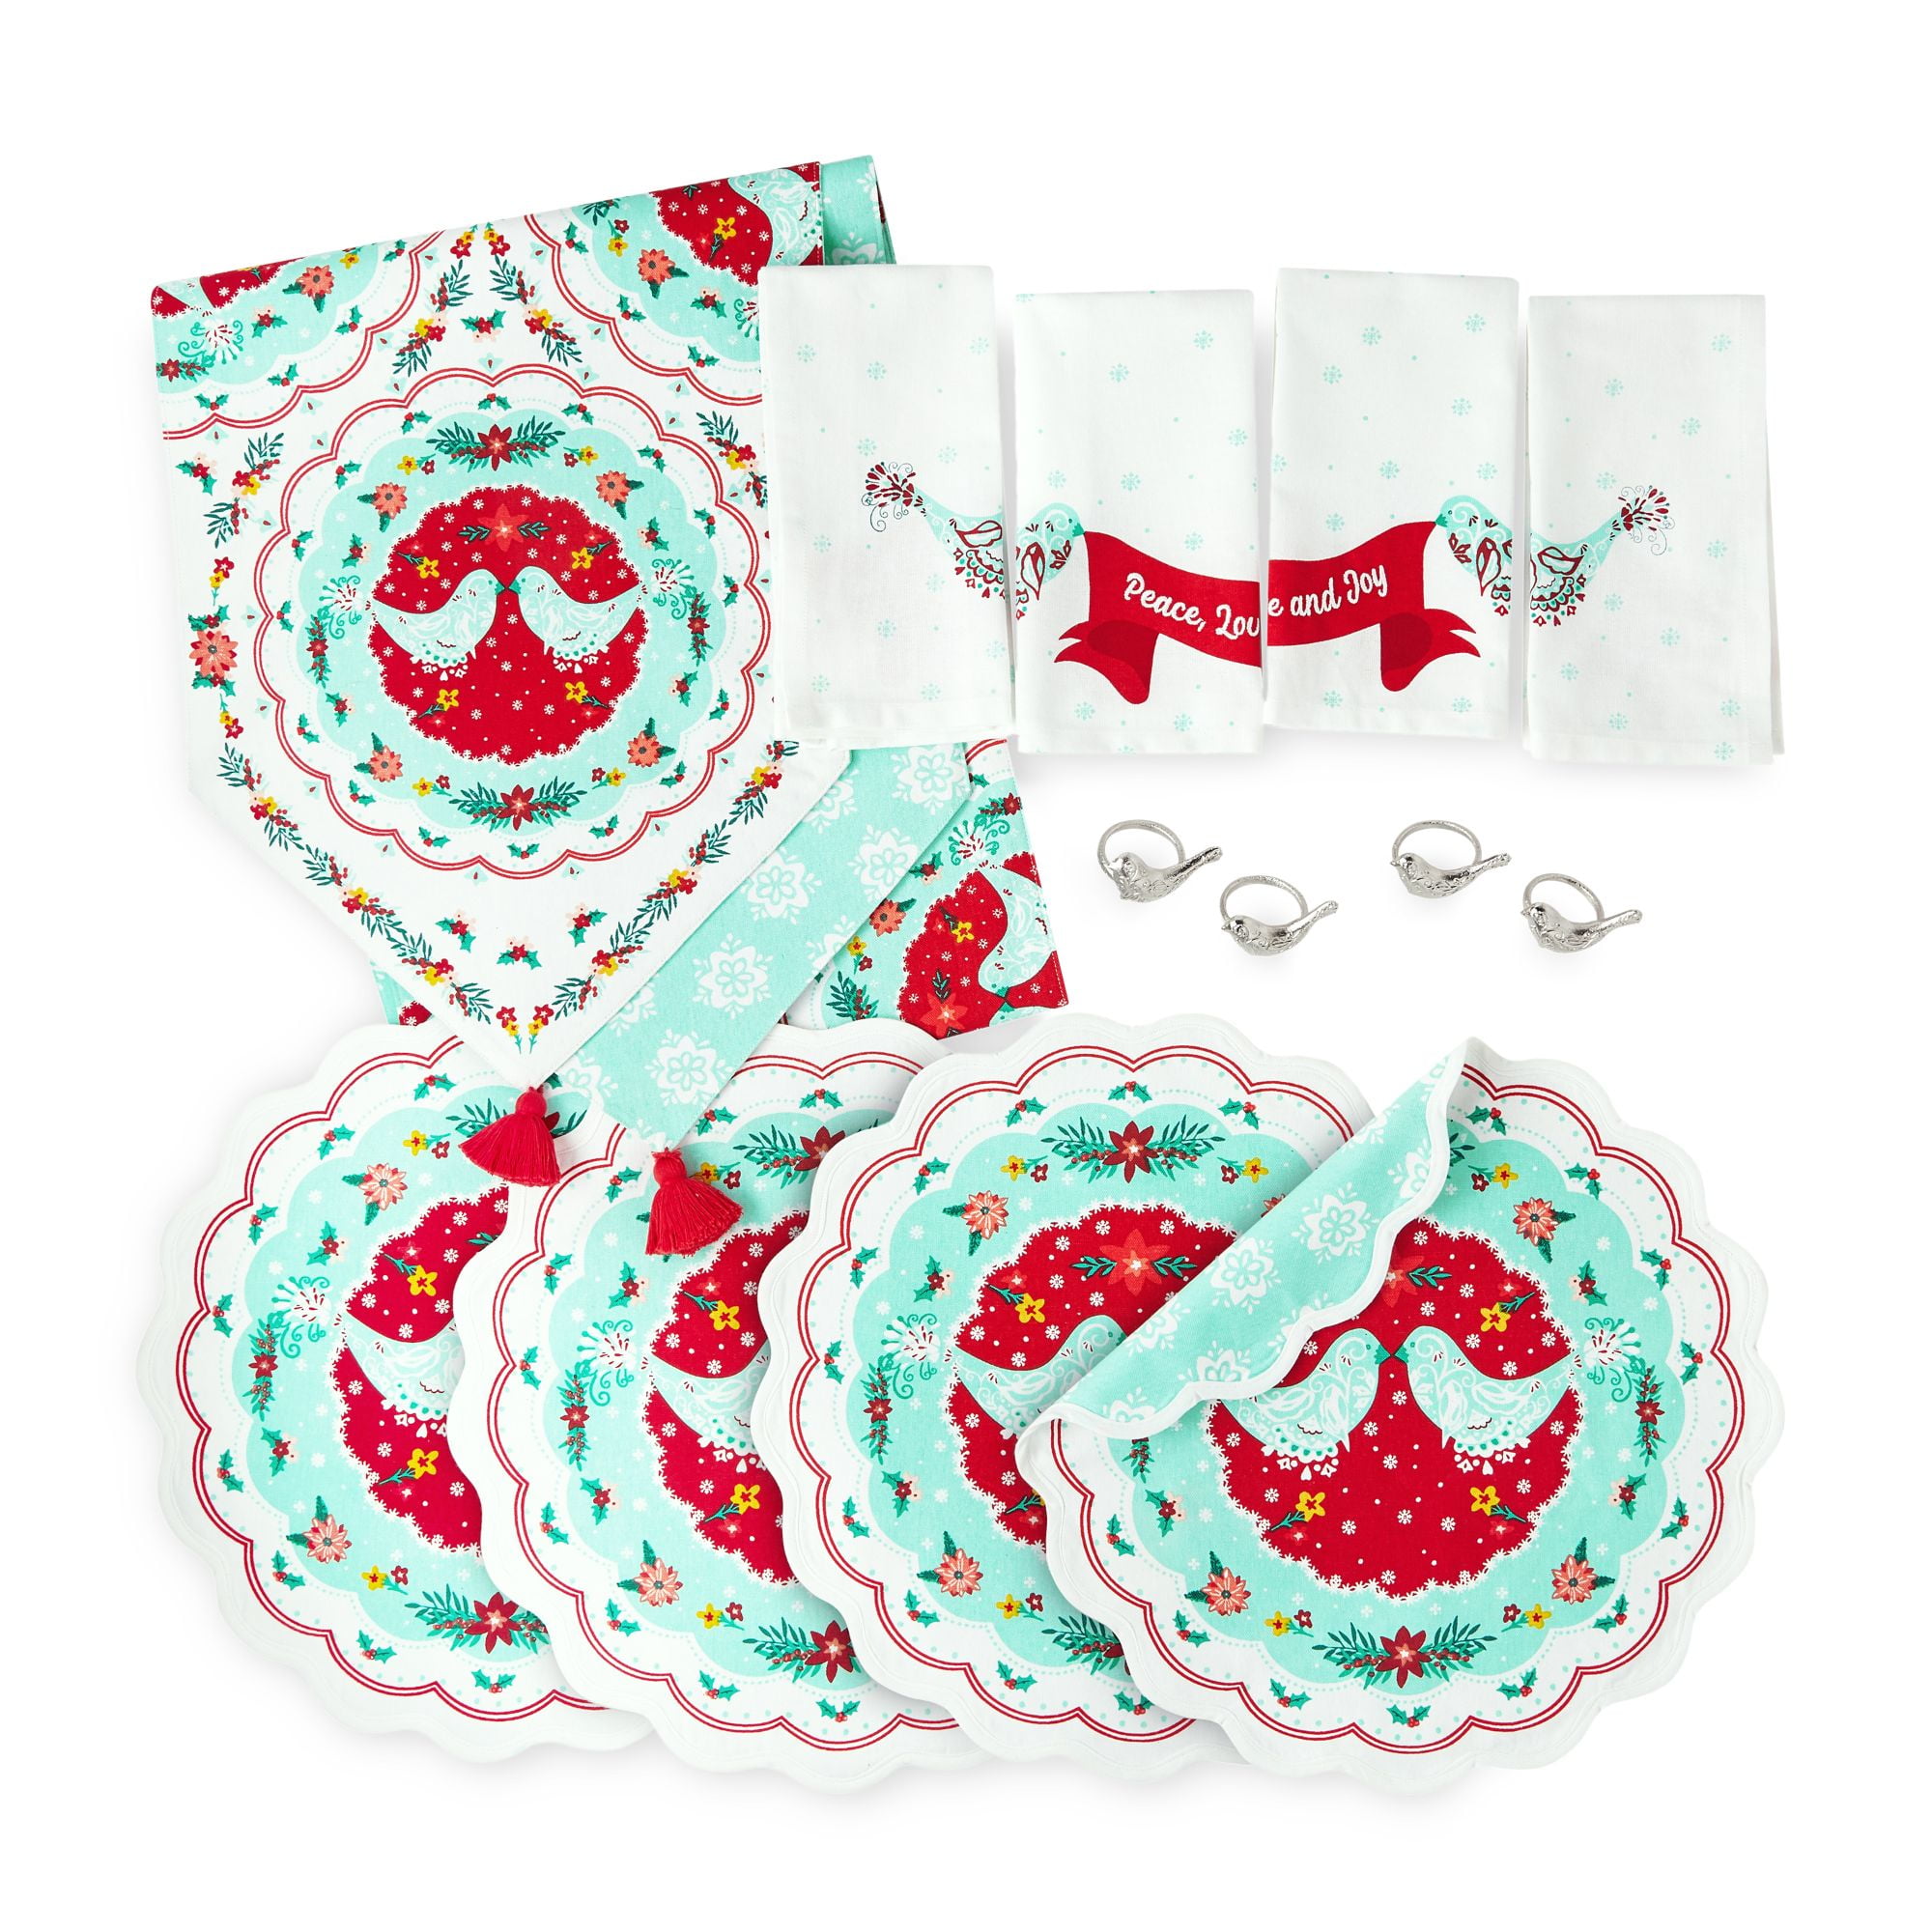 The Pioneer Woman Mazie Bird Runner, Placemat, Napkin, And Napkin Ring Set, Multicolor, 13 Piece